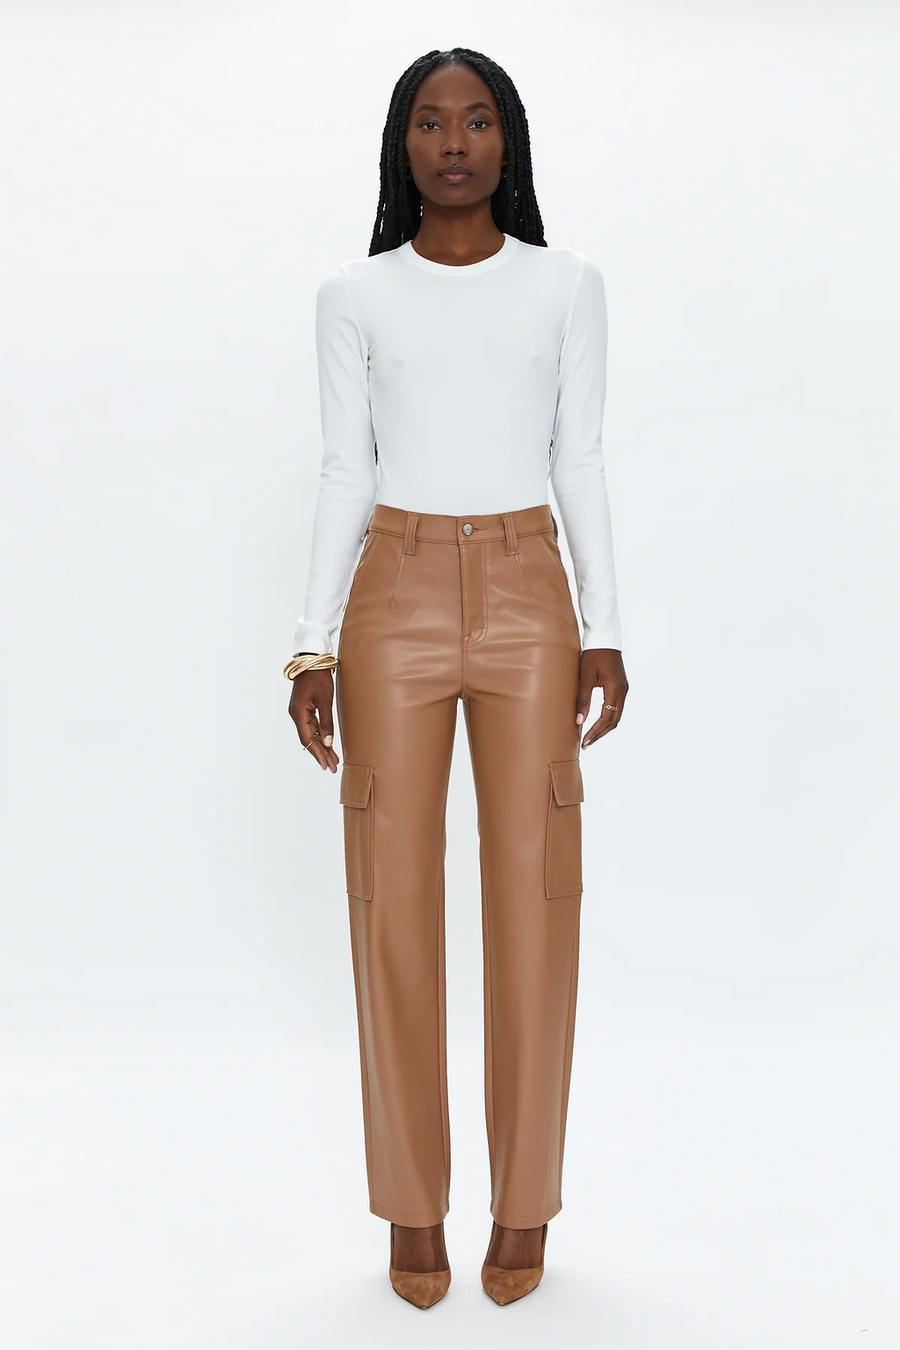 Cassie Utility Pant by Pistola